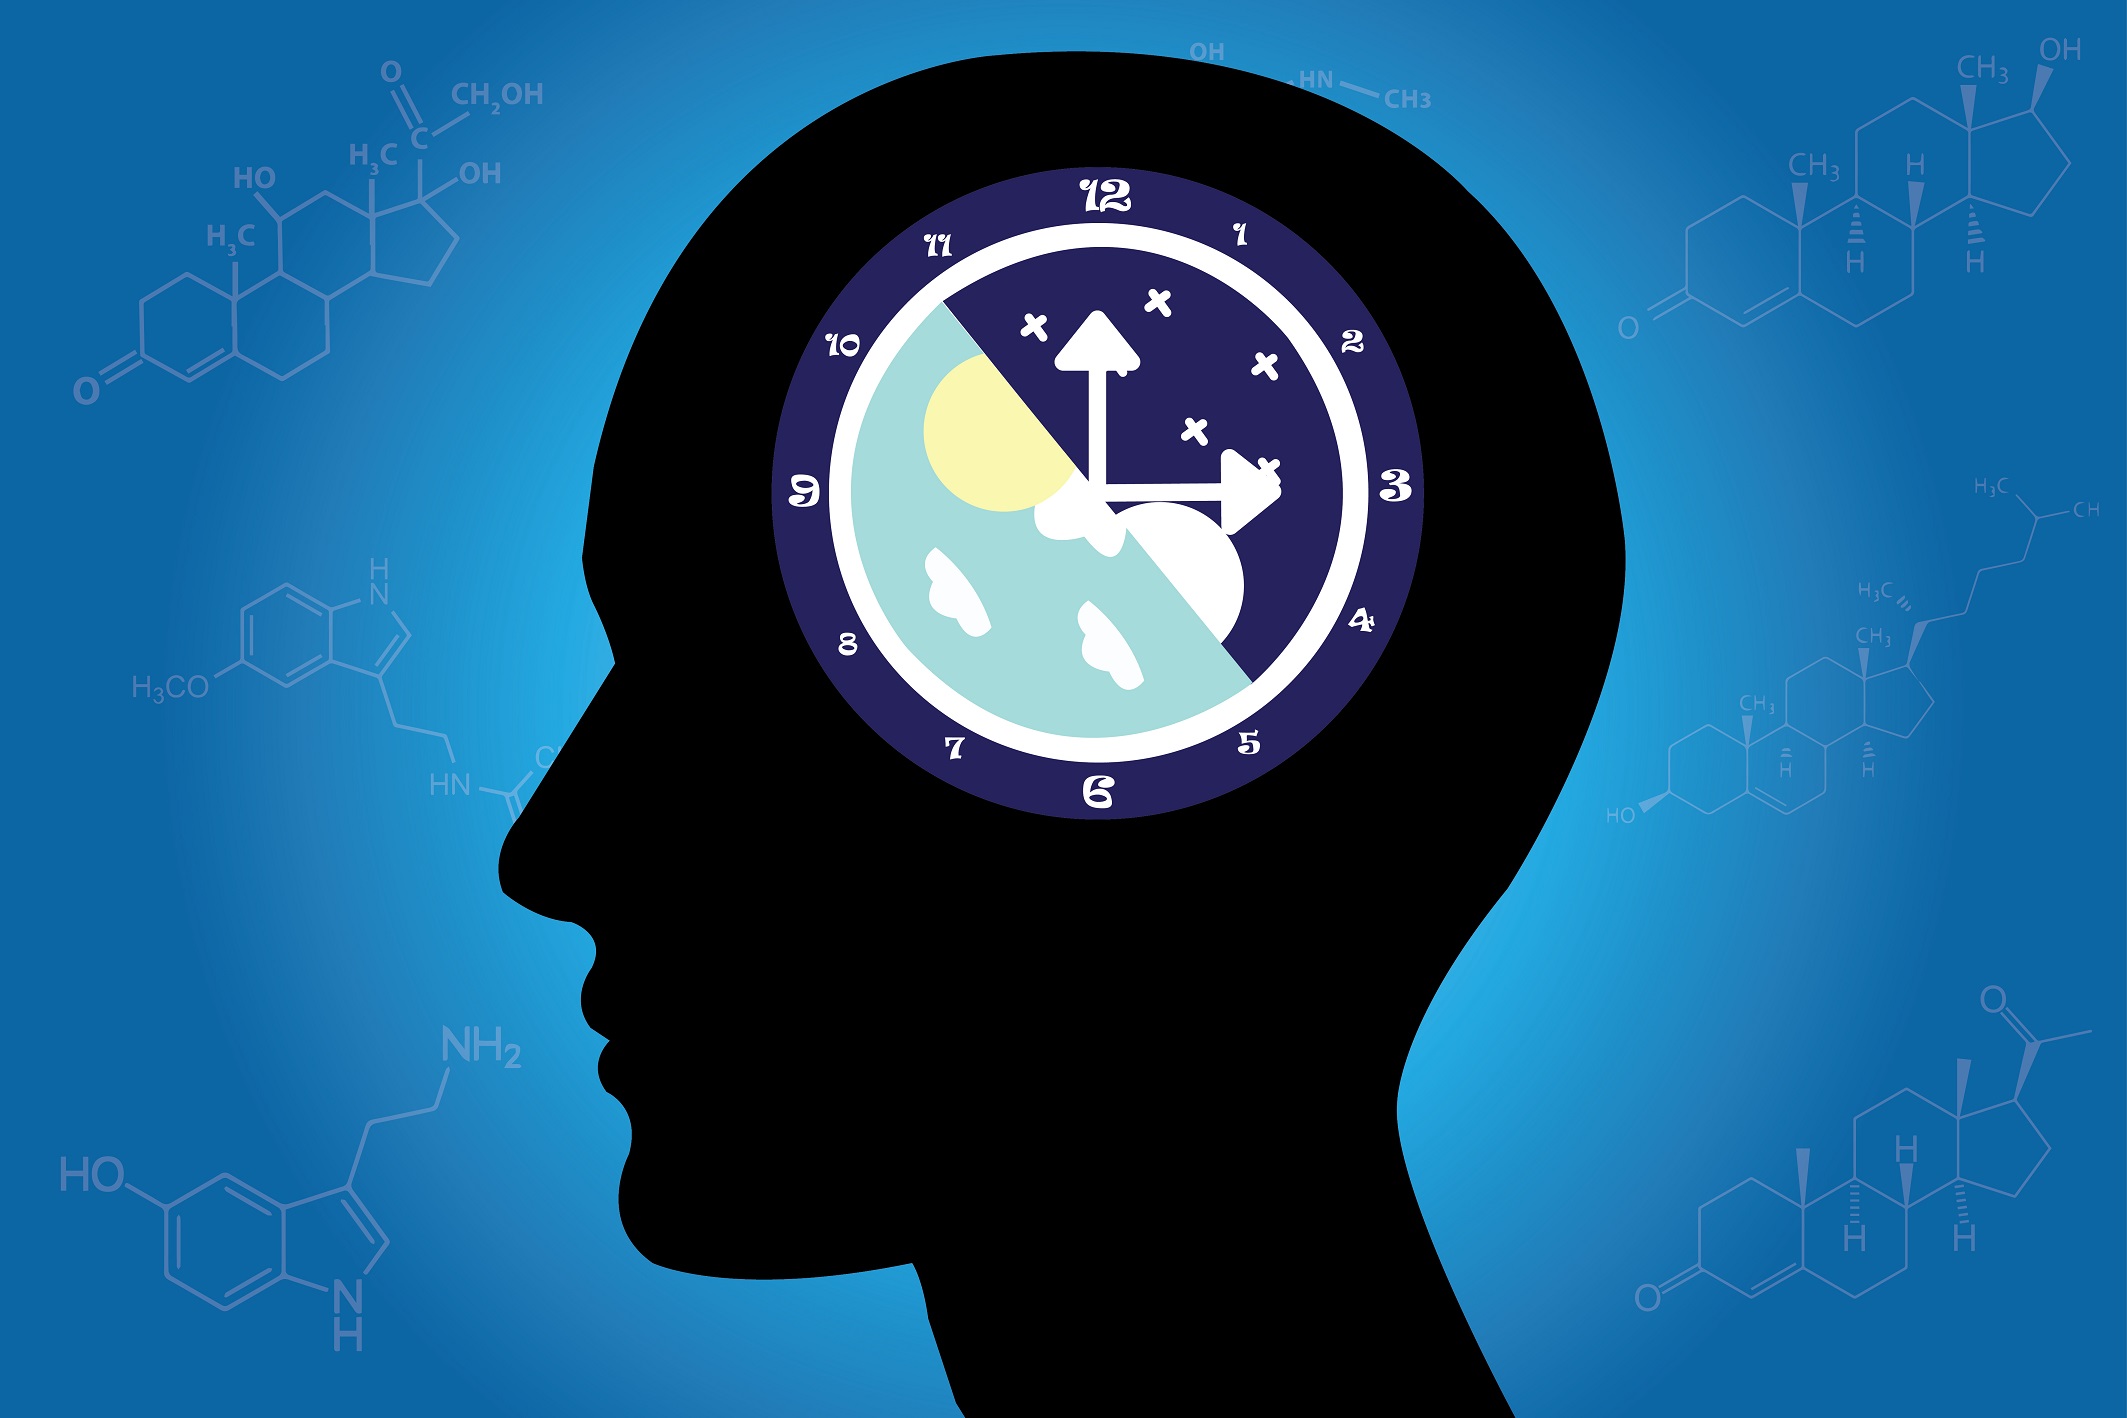 Image of an internal clock in the brain